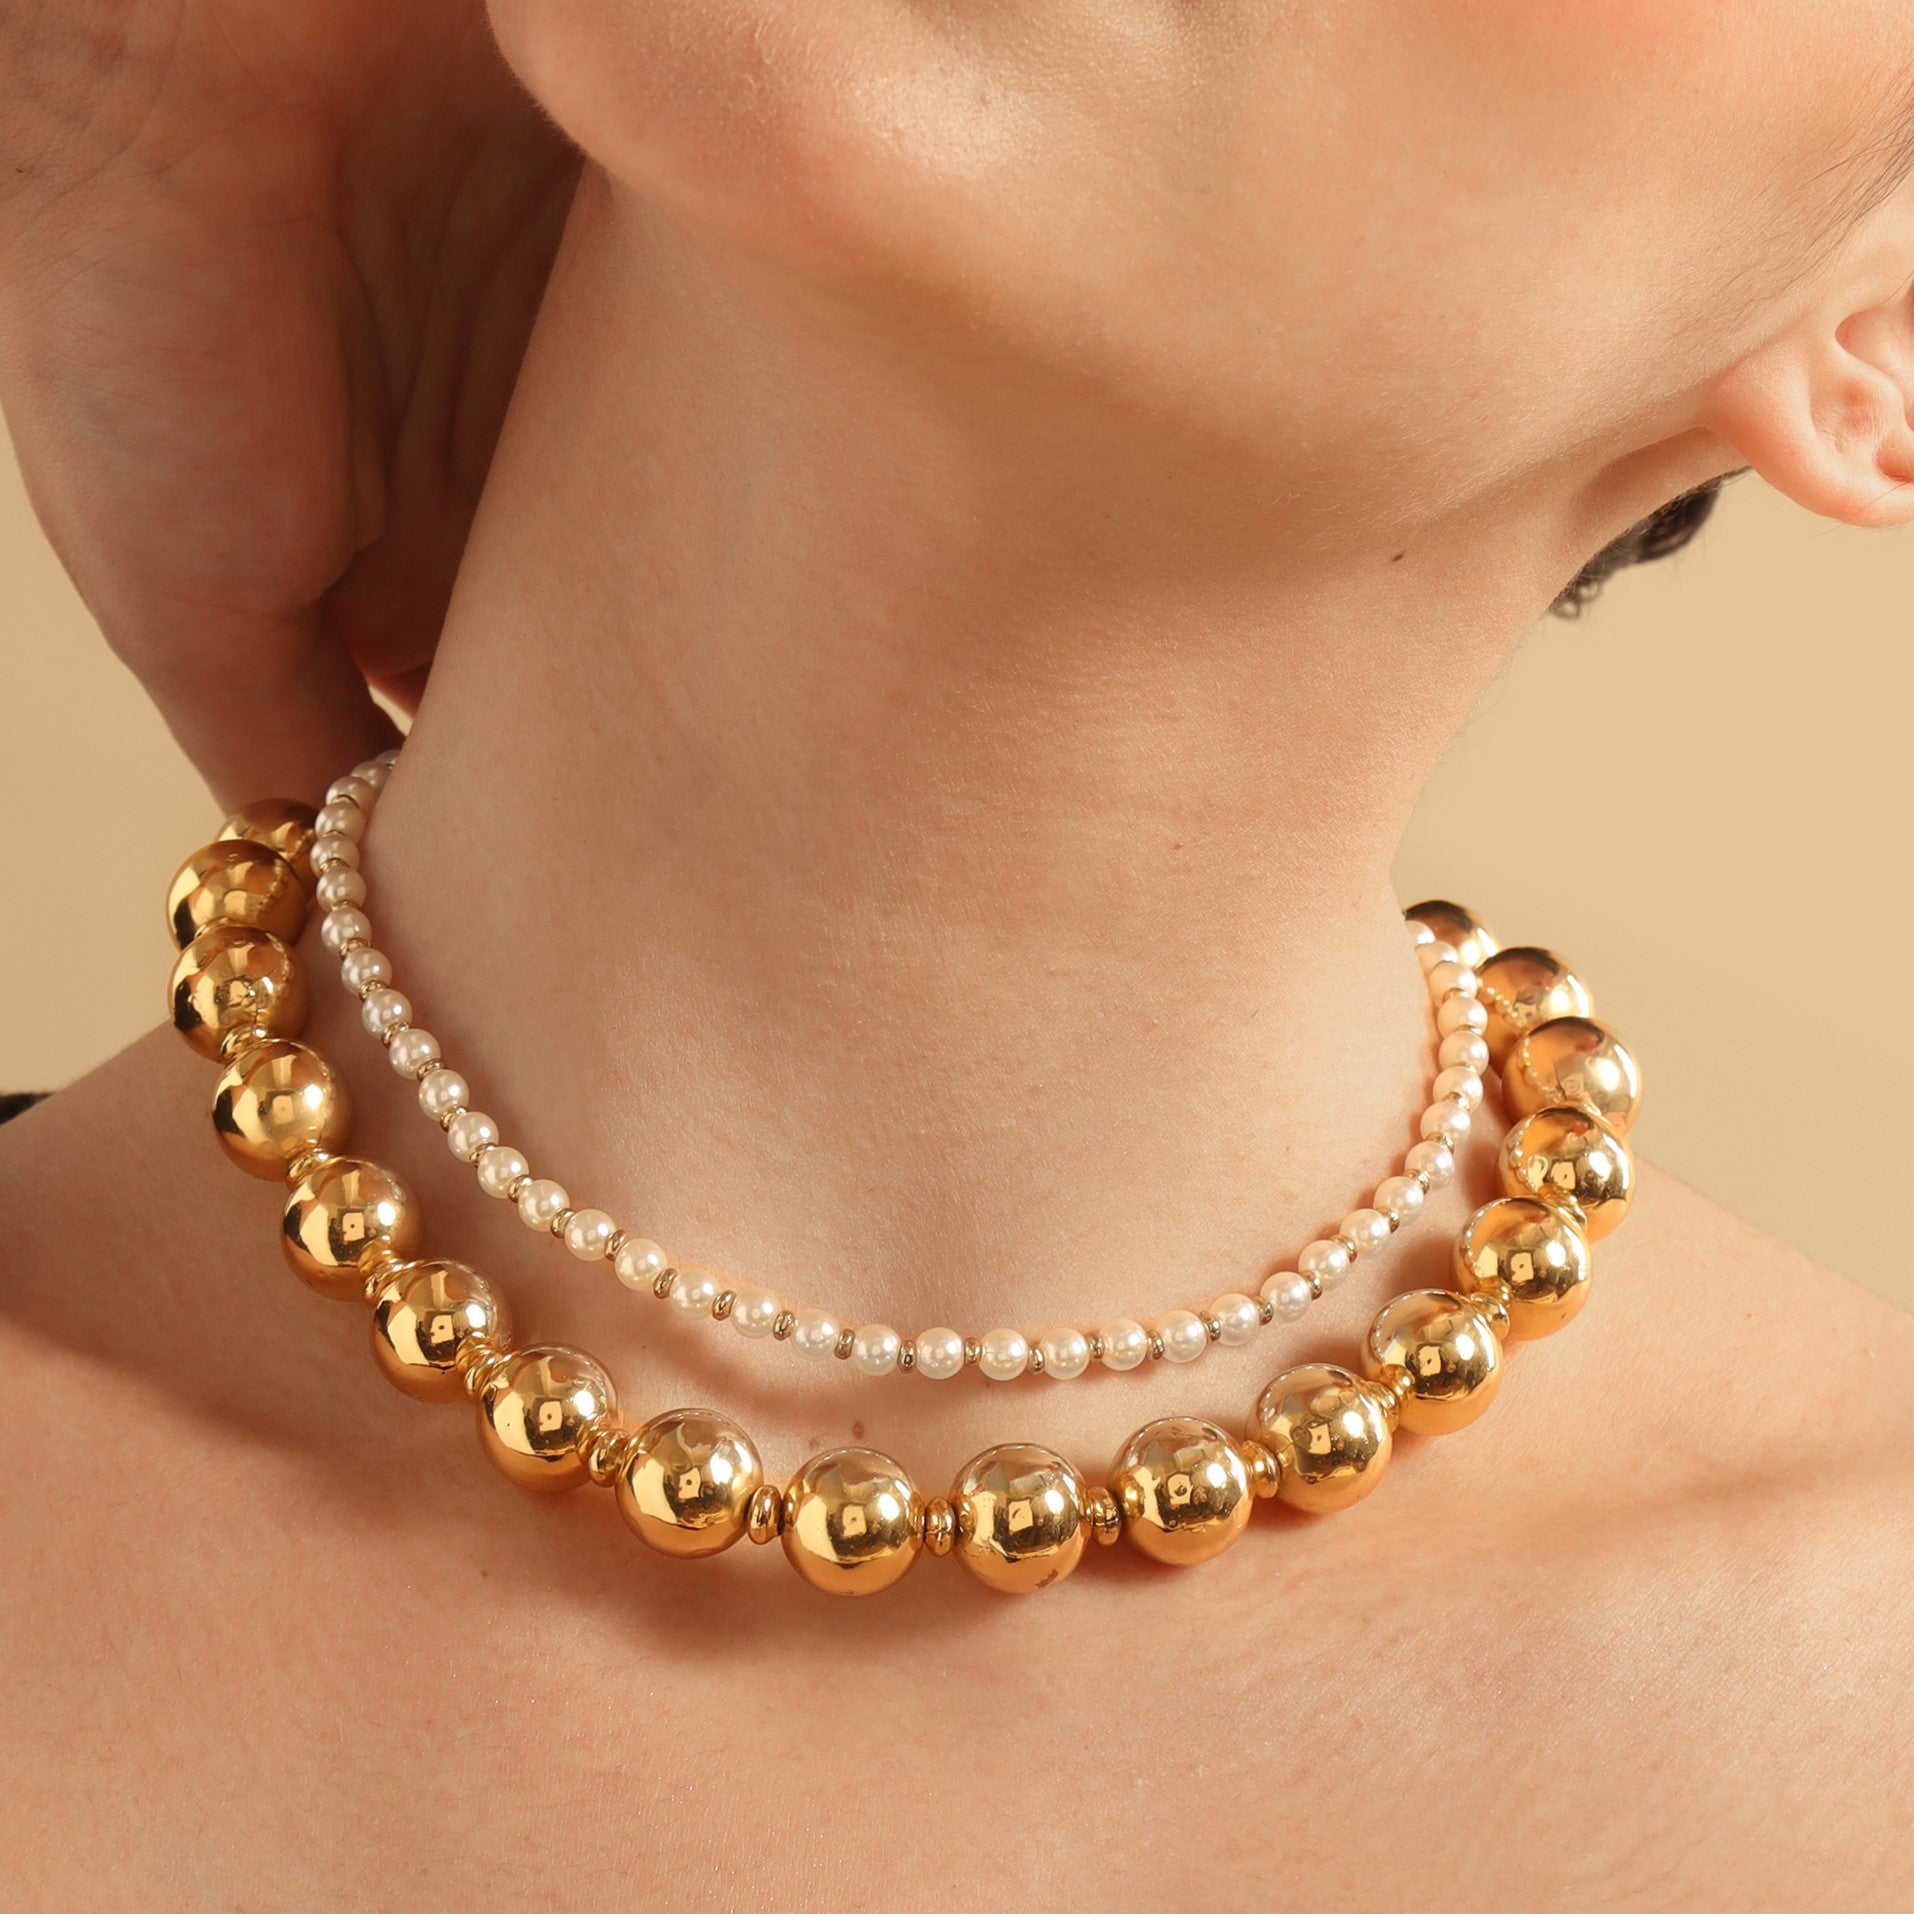 TFC Gold Beads and Pearl Layer Necklace-Enhance your elegance with our collection of gold-plated necklaces for women. Choose from stunning pendant necklaces, chic choker necklaces, and trendy layered necklaces. Our sleek and dainty designs are both affordable and anti-tarnish, ensuring lasting beauty. Enjoy the cheapest fashion jewellery, lightweight and stylish- only at The Fun Company.